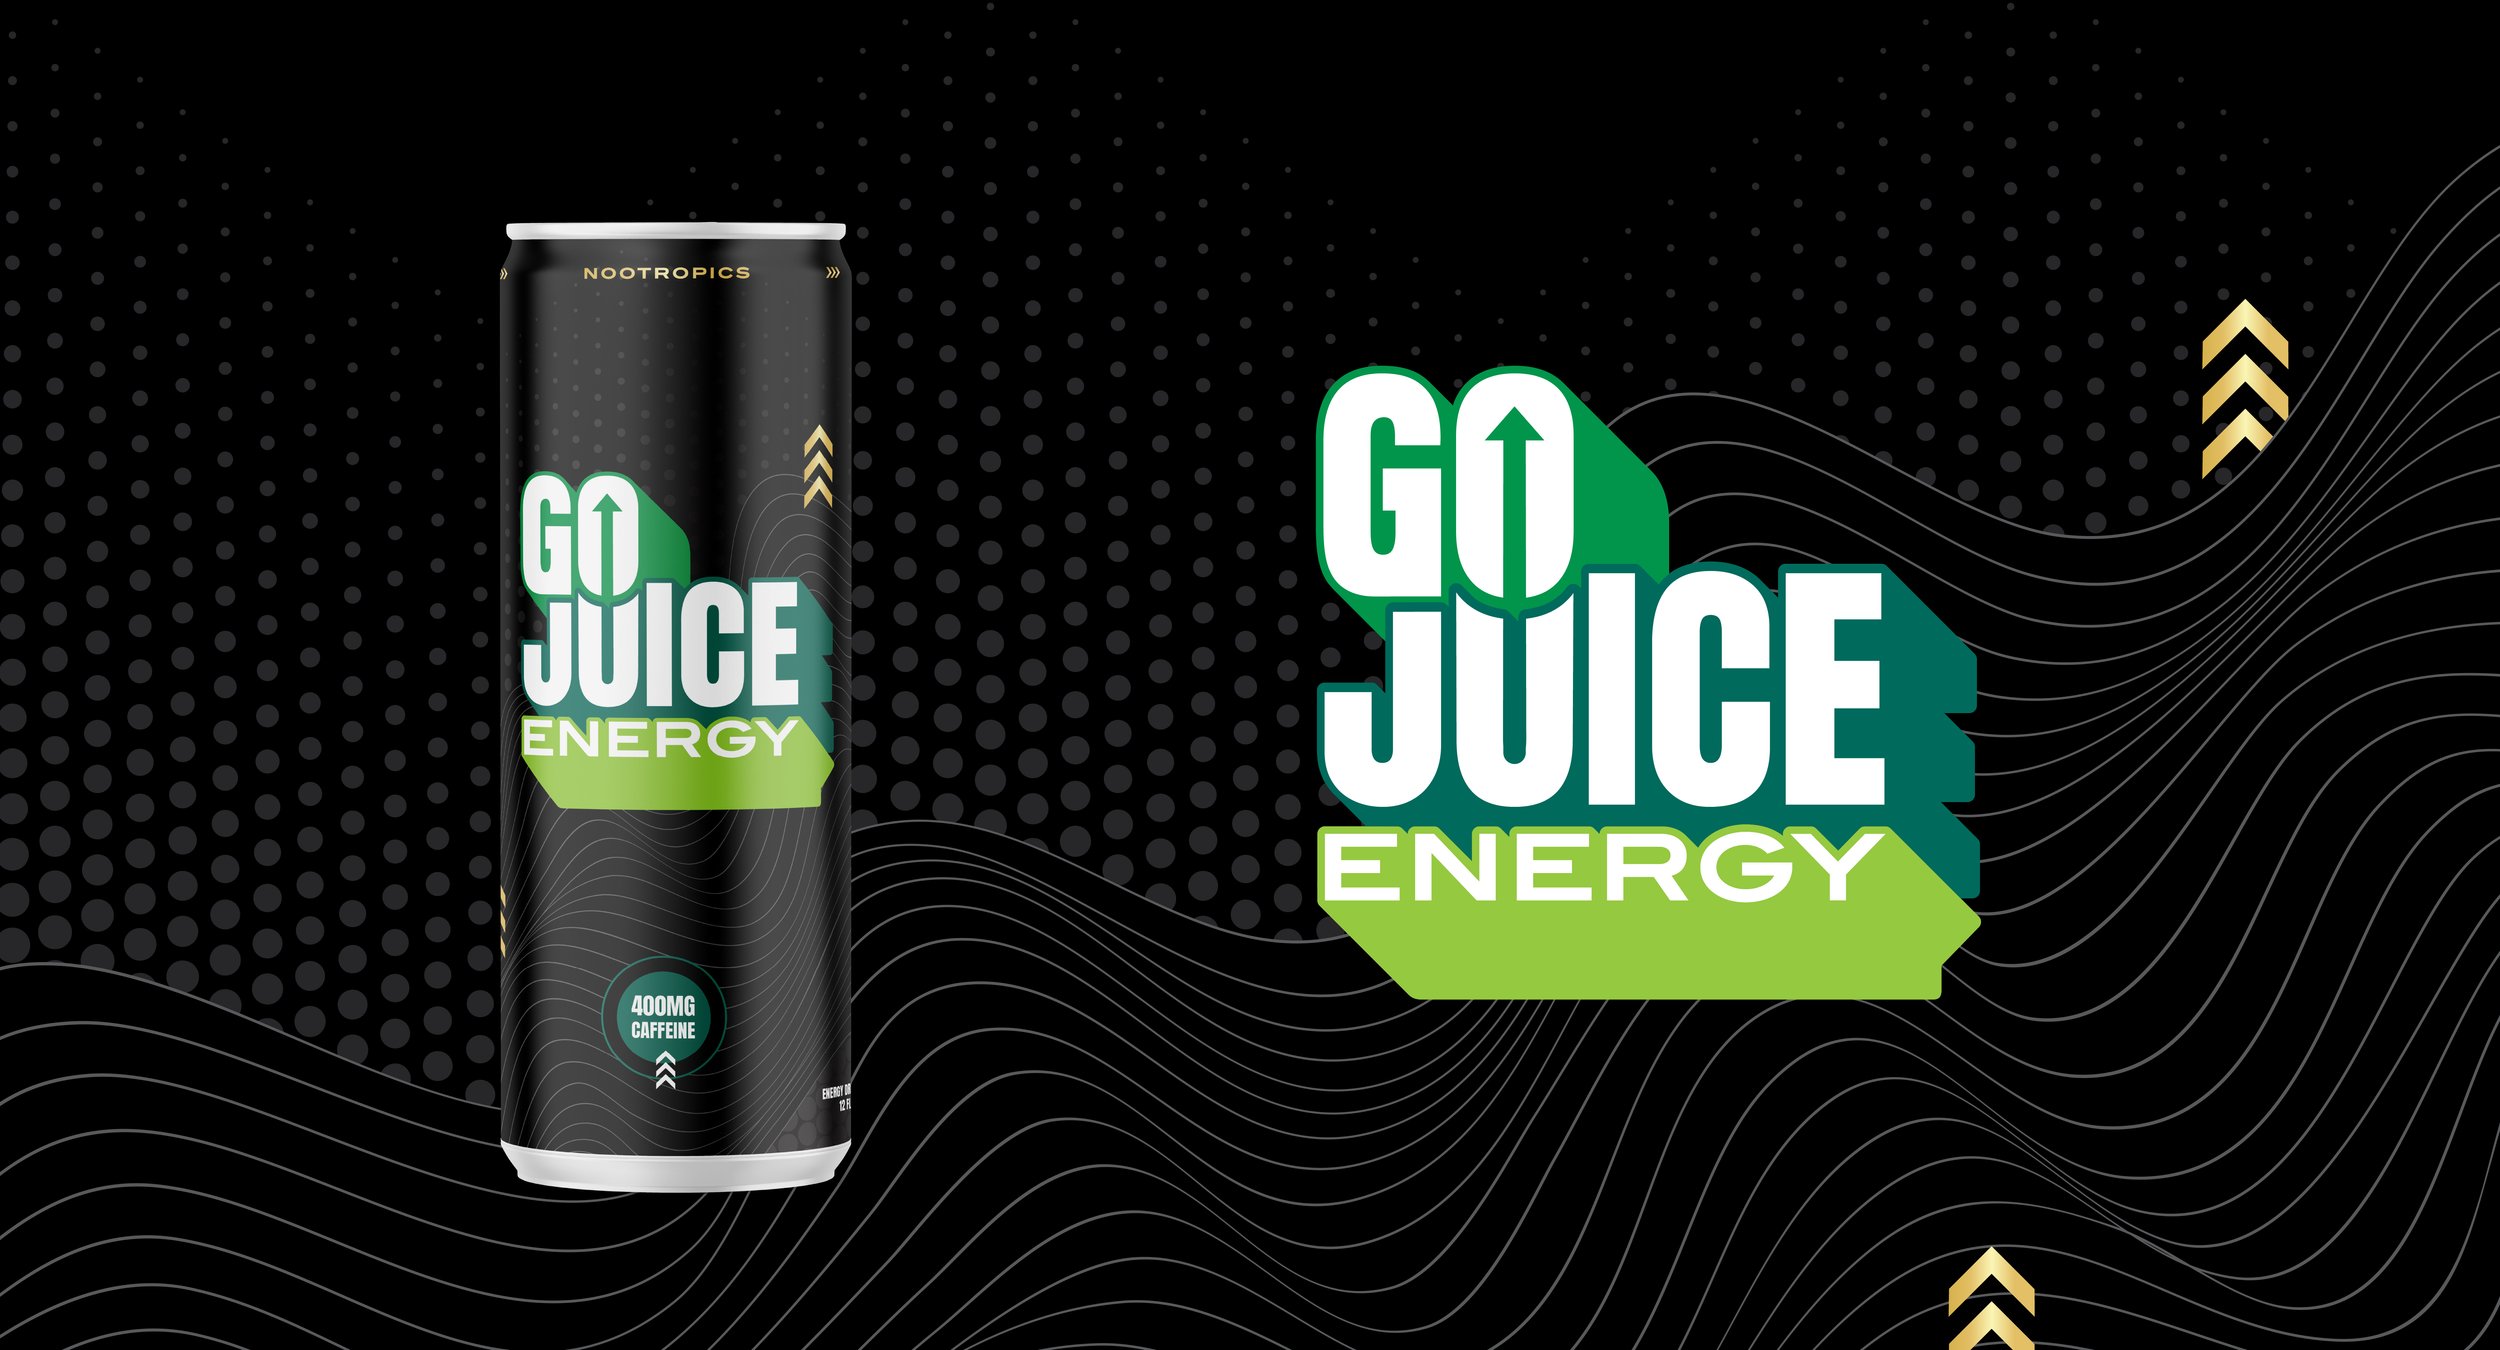 Go Juice Energy Logo and Packaging Graphic Design_2.jpg